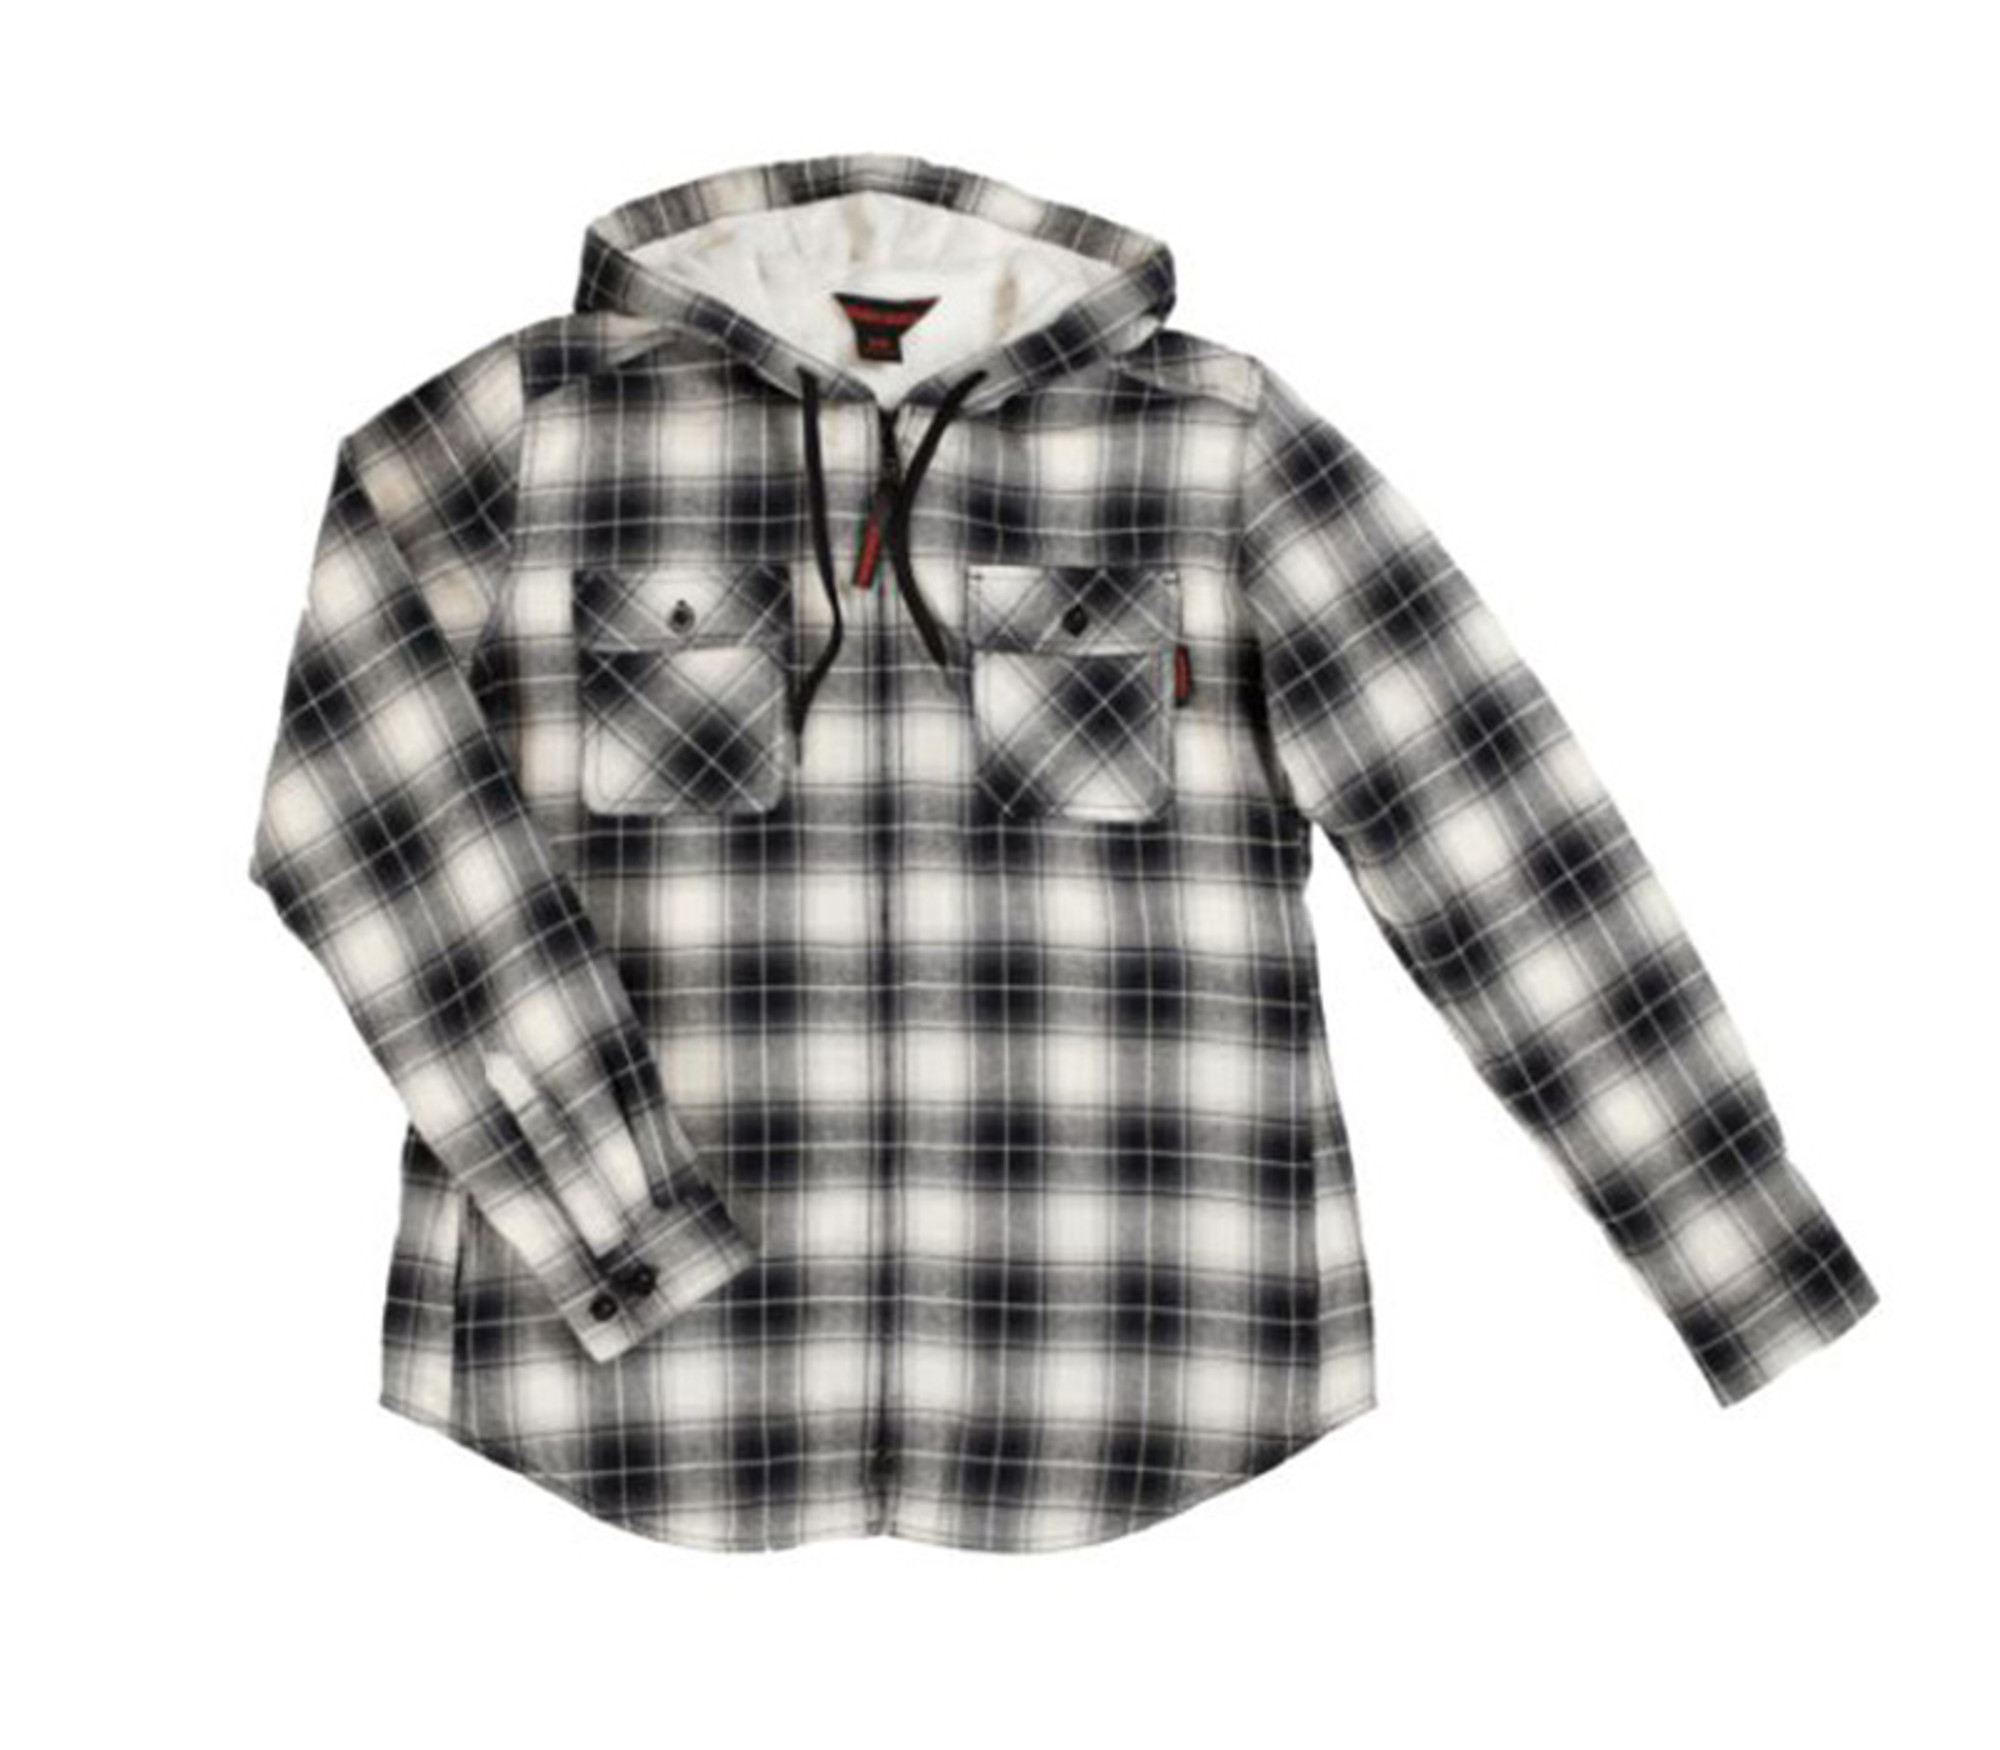 Women’s Plush Pile-Lined Flannel (Grey Plaid) - 2 Pack